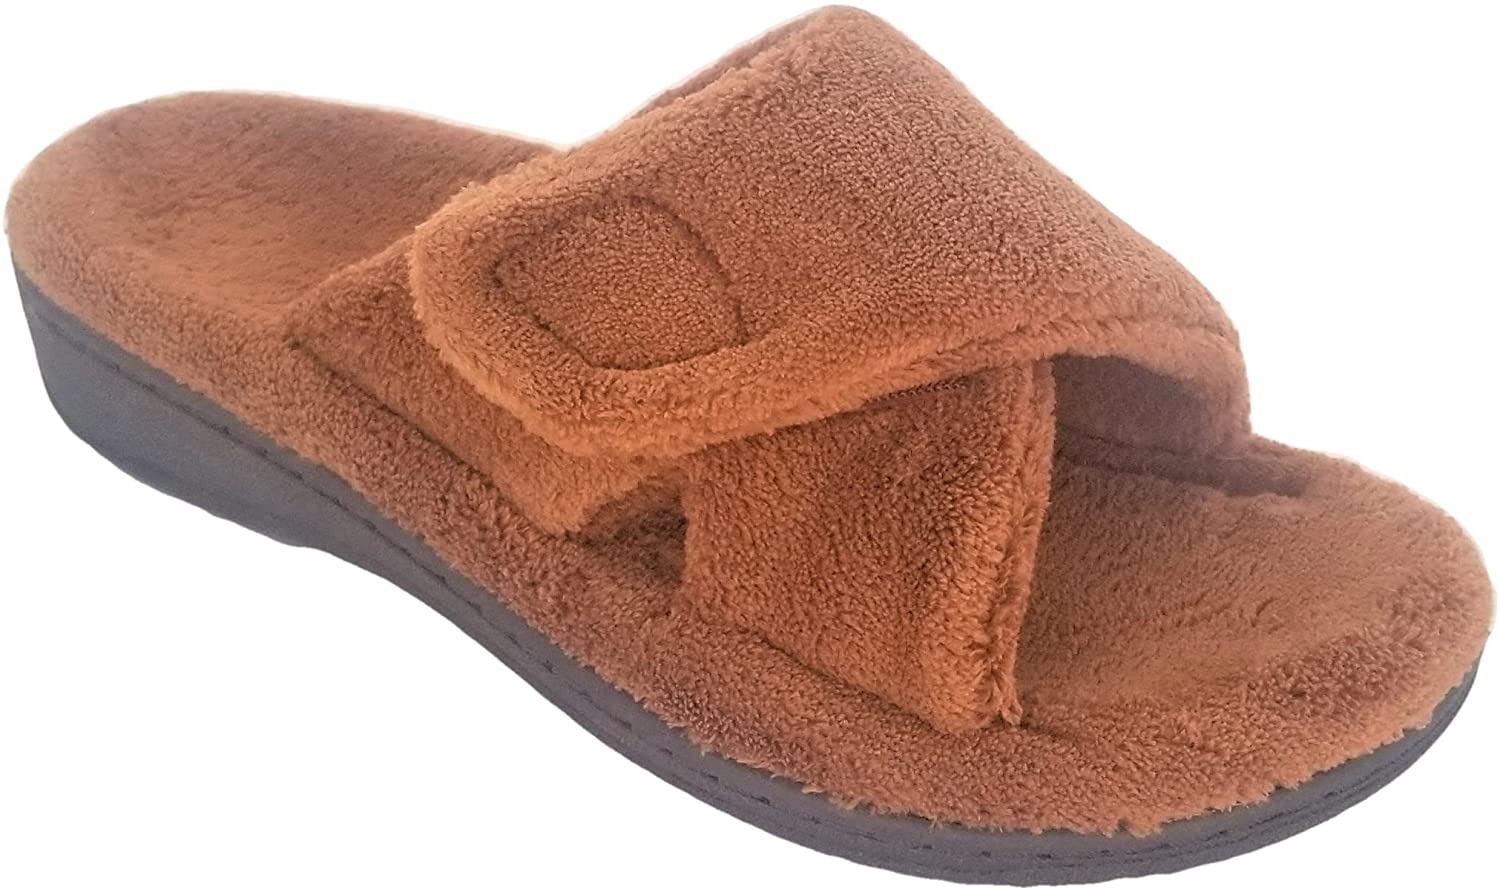 Ladies Comfortable Cozy Adjustable House Details about   Vionic Women's Indulge Relax Slipper